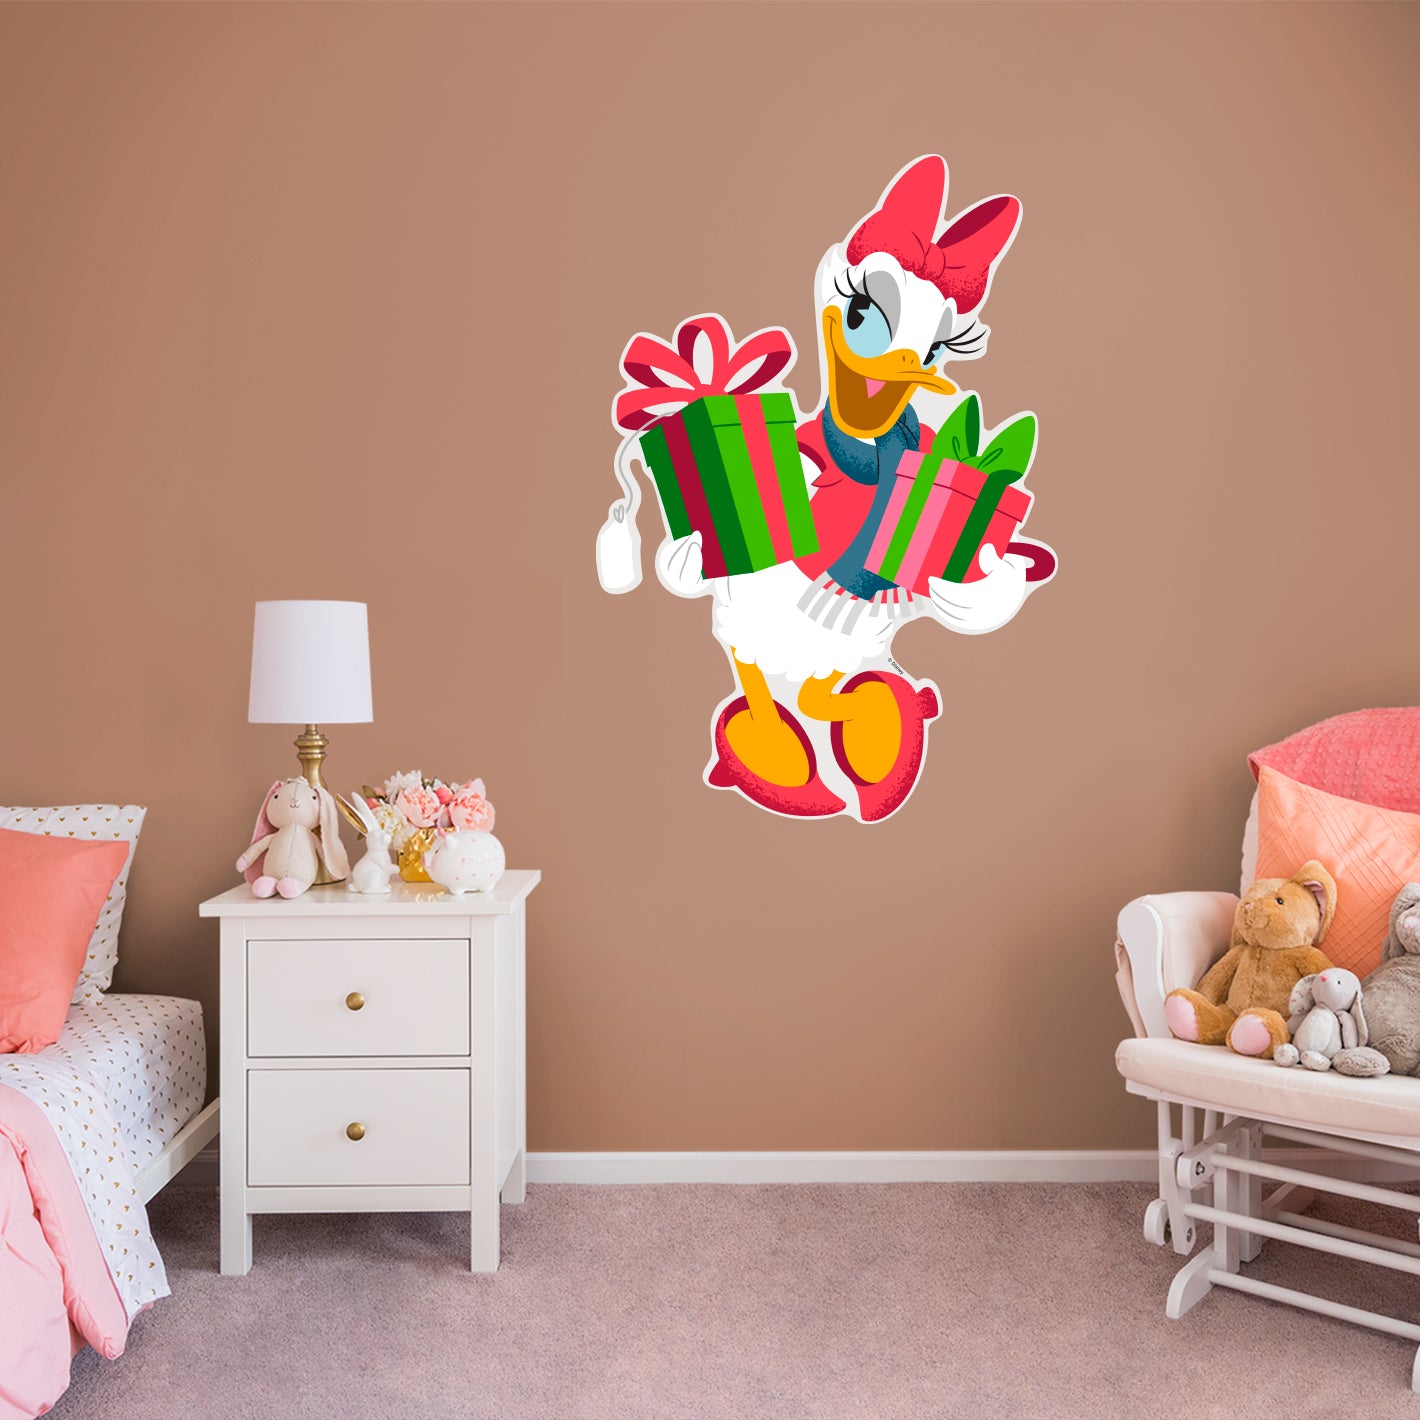 Festive Cheer: Daisy Duck Holiday Real Big        - Officially Licensed Disney Removable     Adhesive Decal